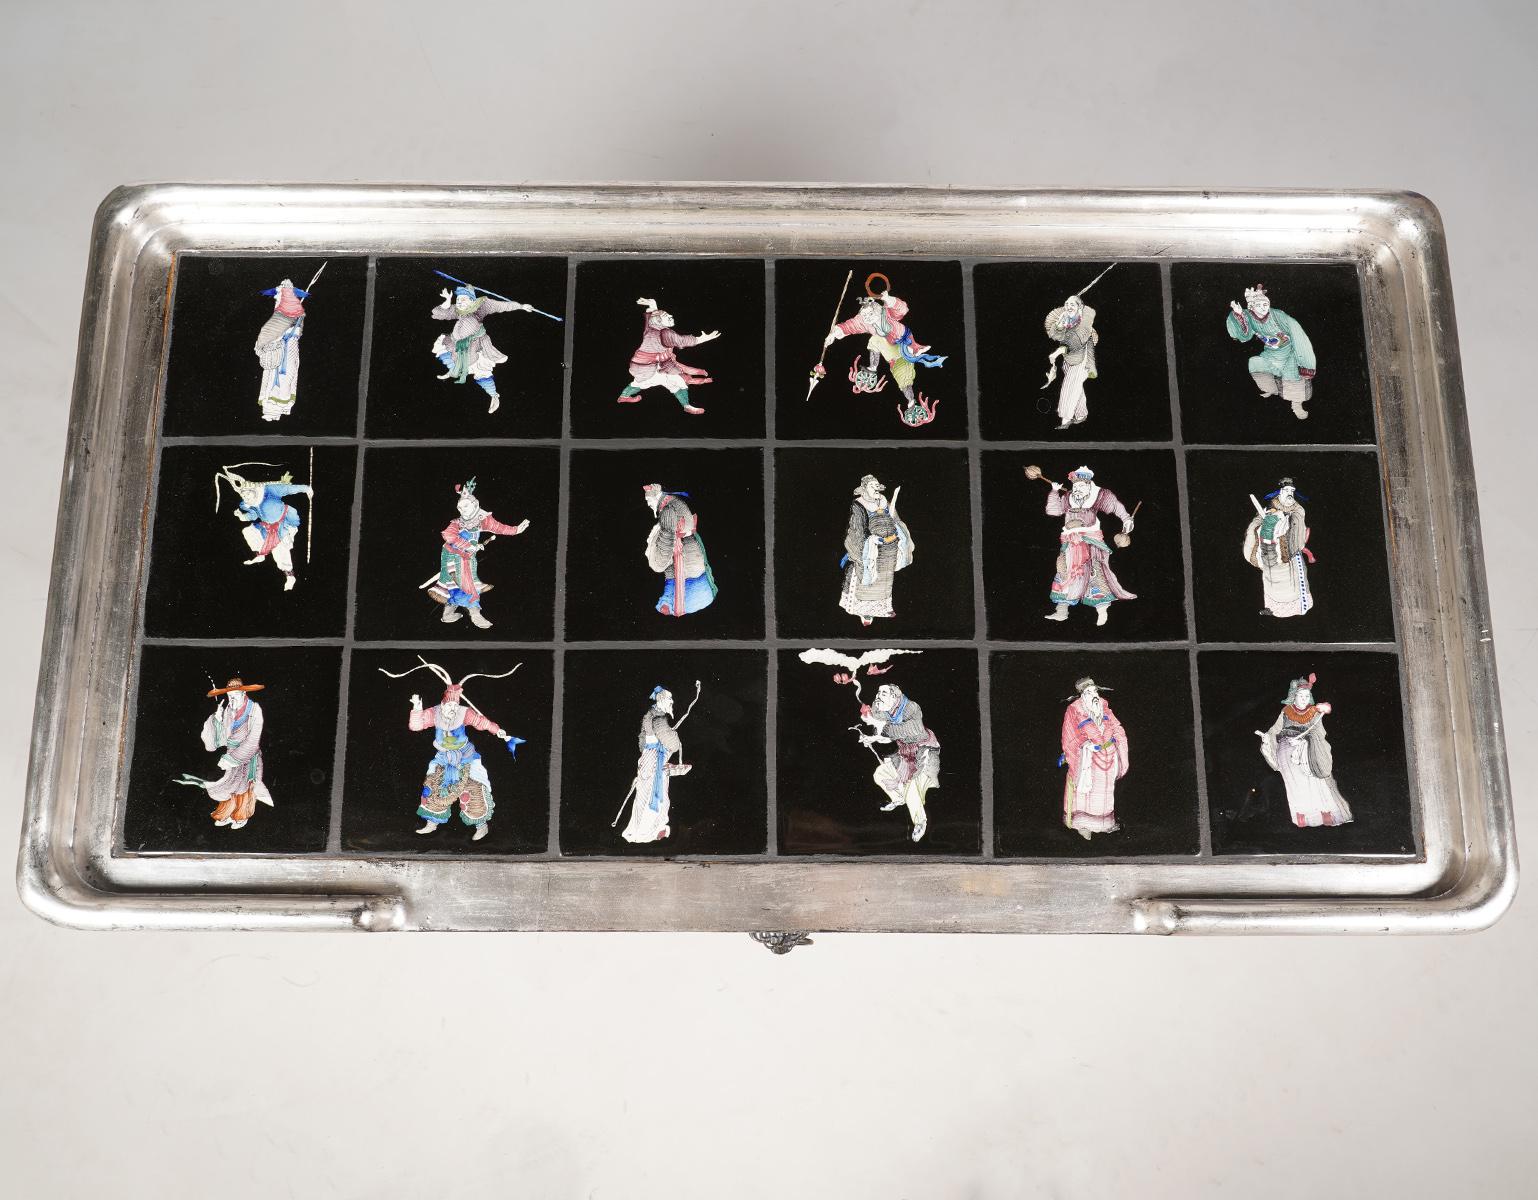 This unique pair of French silver gilt and gray painted tables, dating to the second half of the 20th century, feature ceramic glazed tile tops. The tiles are individually painted on a black background displaying a wealth of Japanese figures and